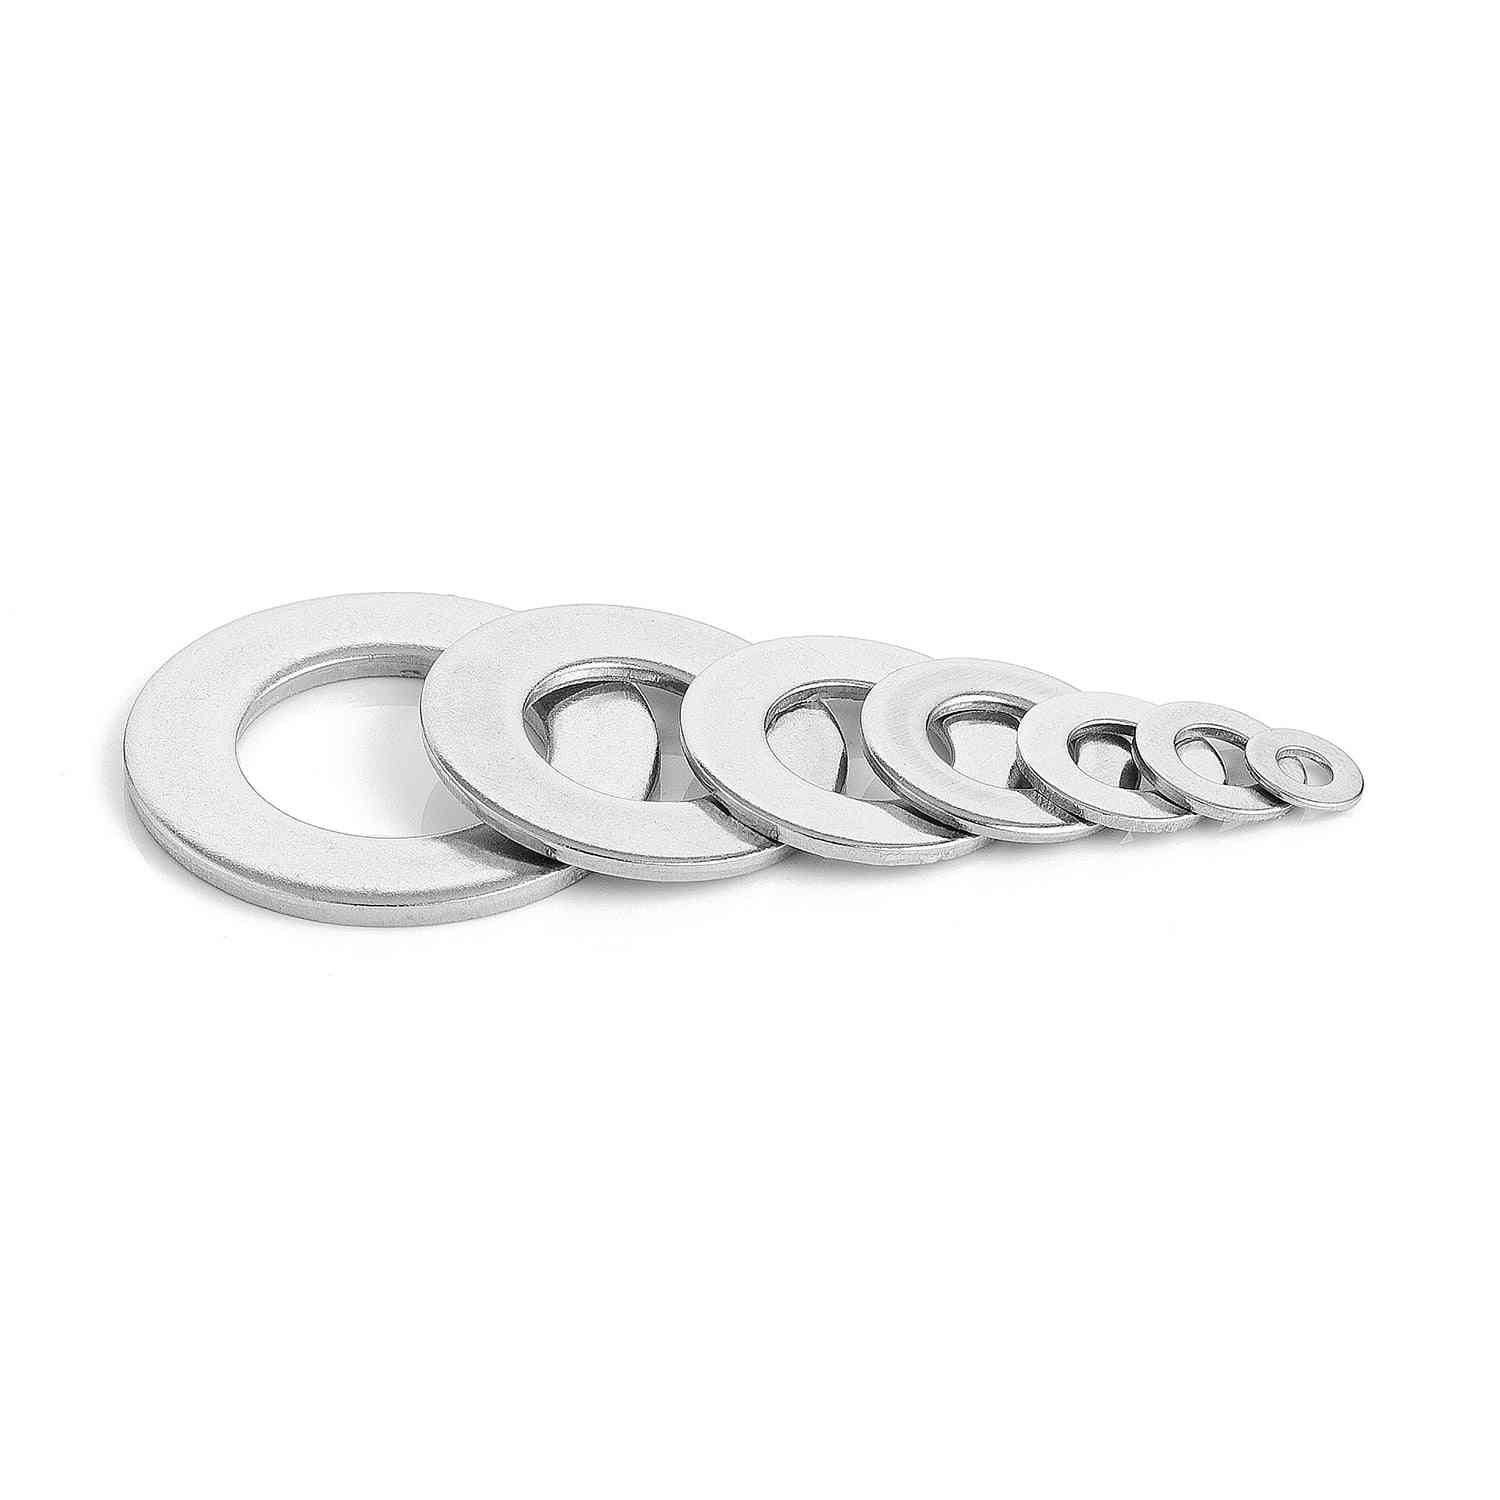 Stainless Steel Plain Washer/gaskets